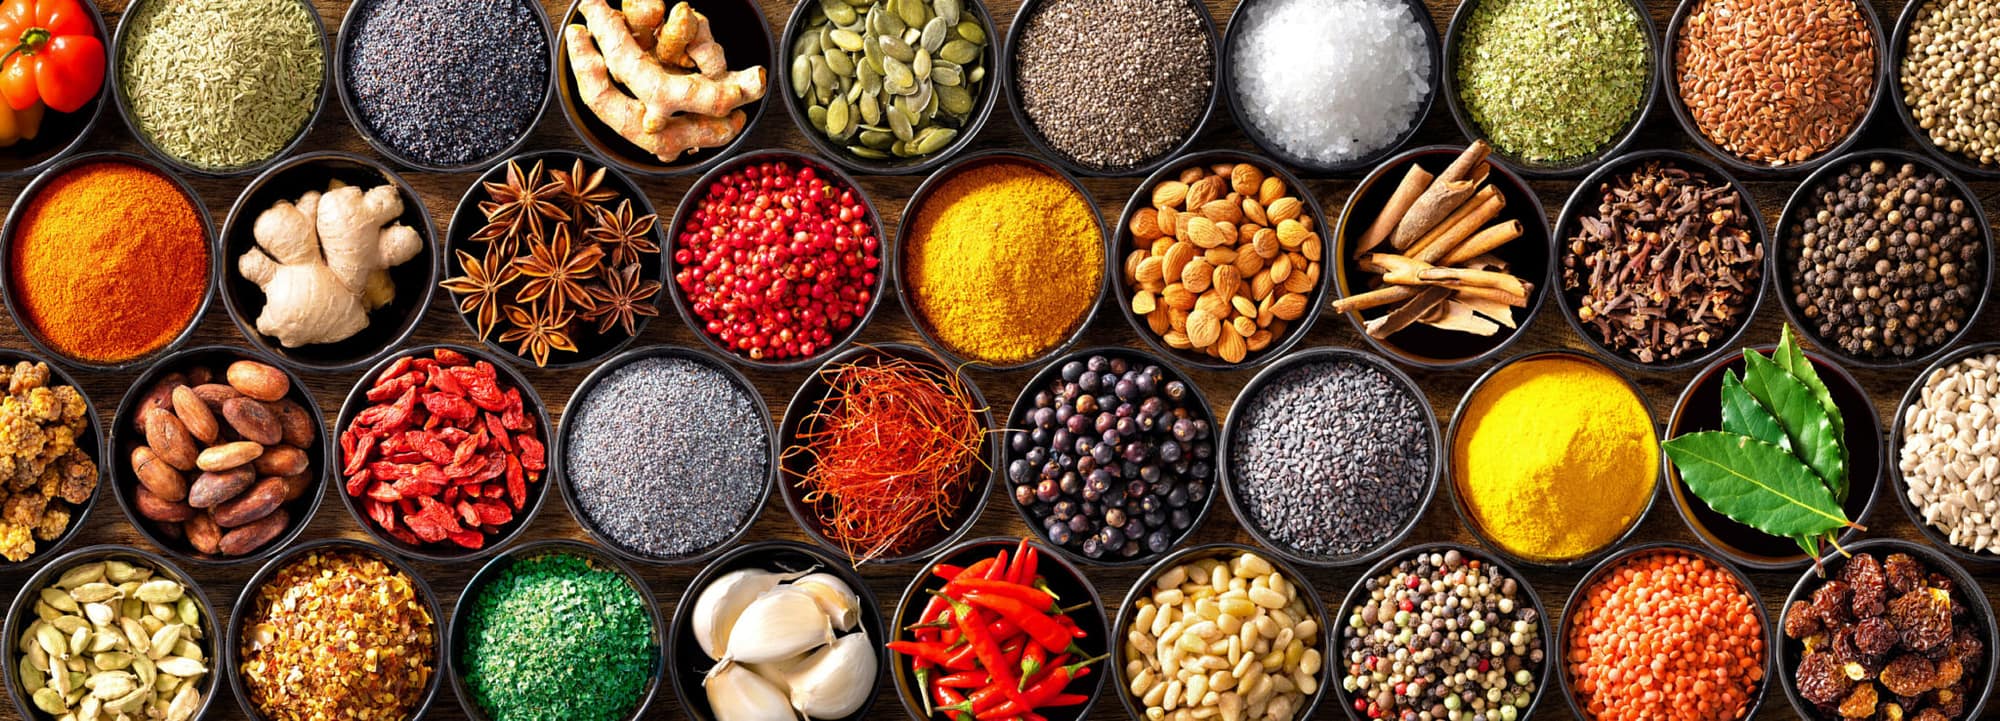 Cross-cultural cuisine is all about globally sourced specialty ingredients